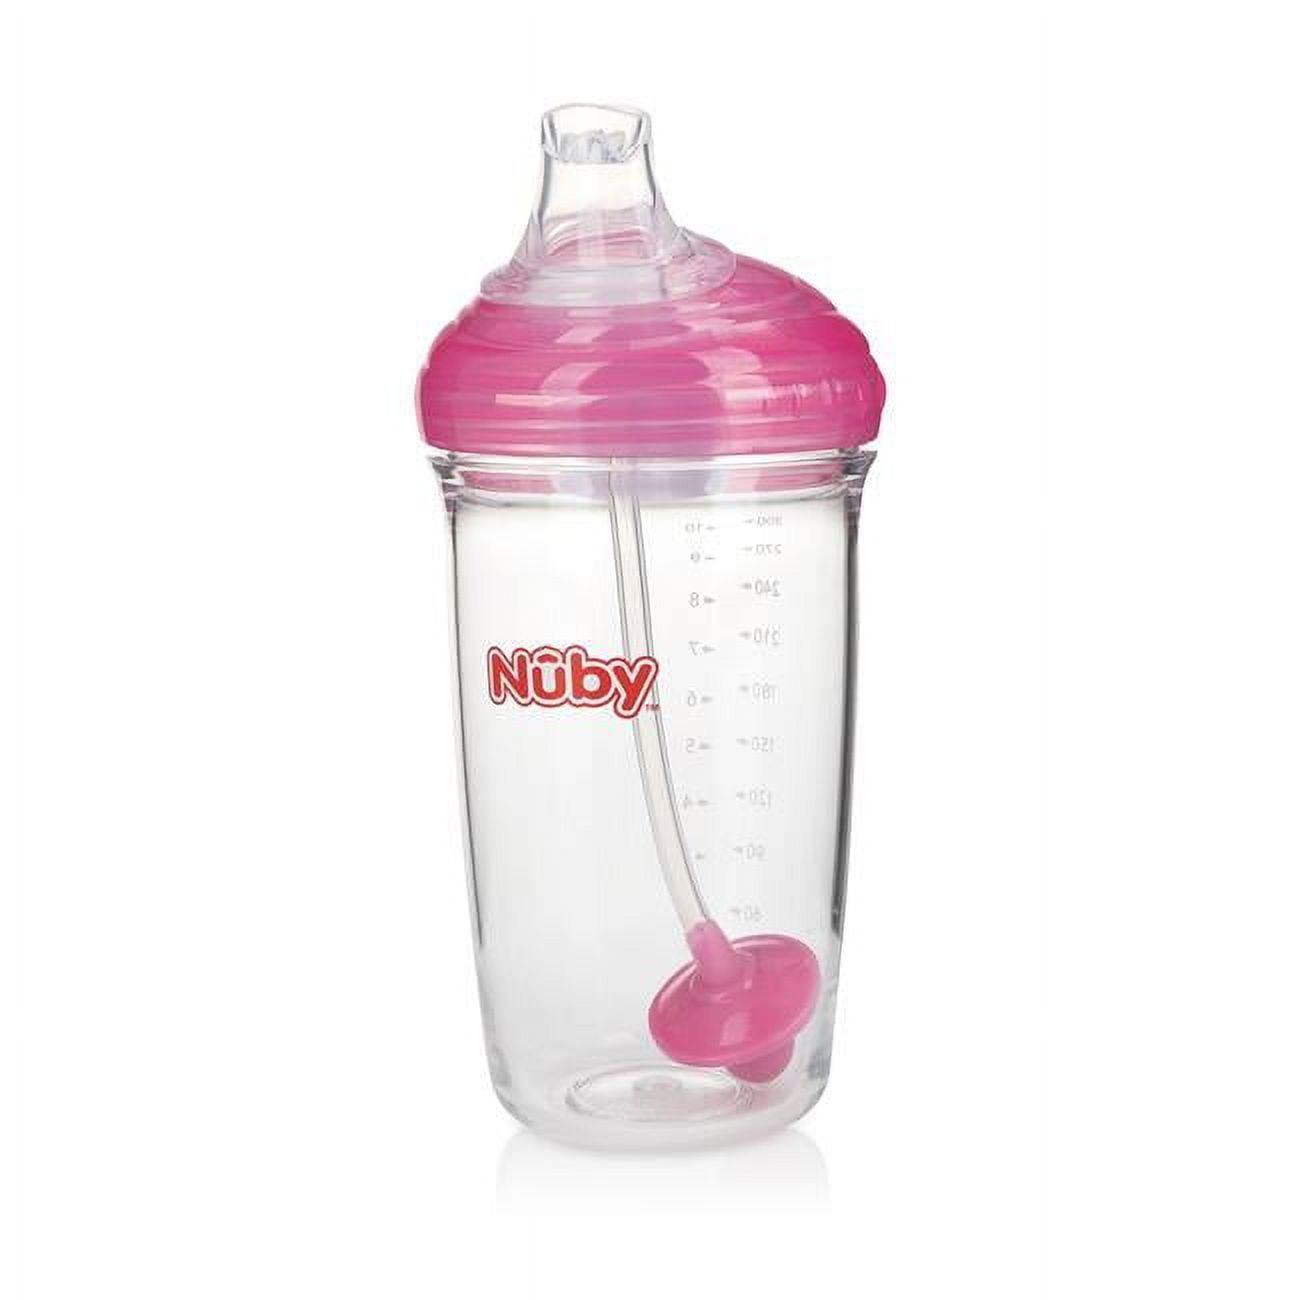 Picture of DDI 2346686 Nuby? No-Spill Trainer Cups w/Hygienic Cover - Pink  10 oz Case of 24